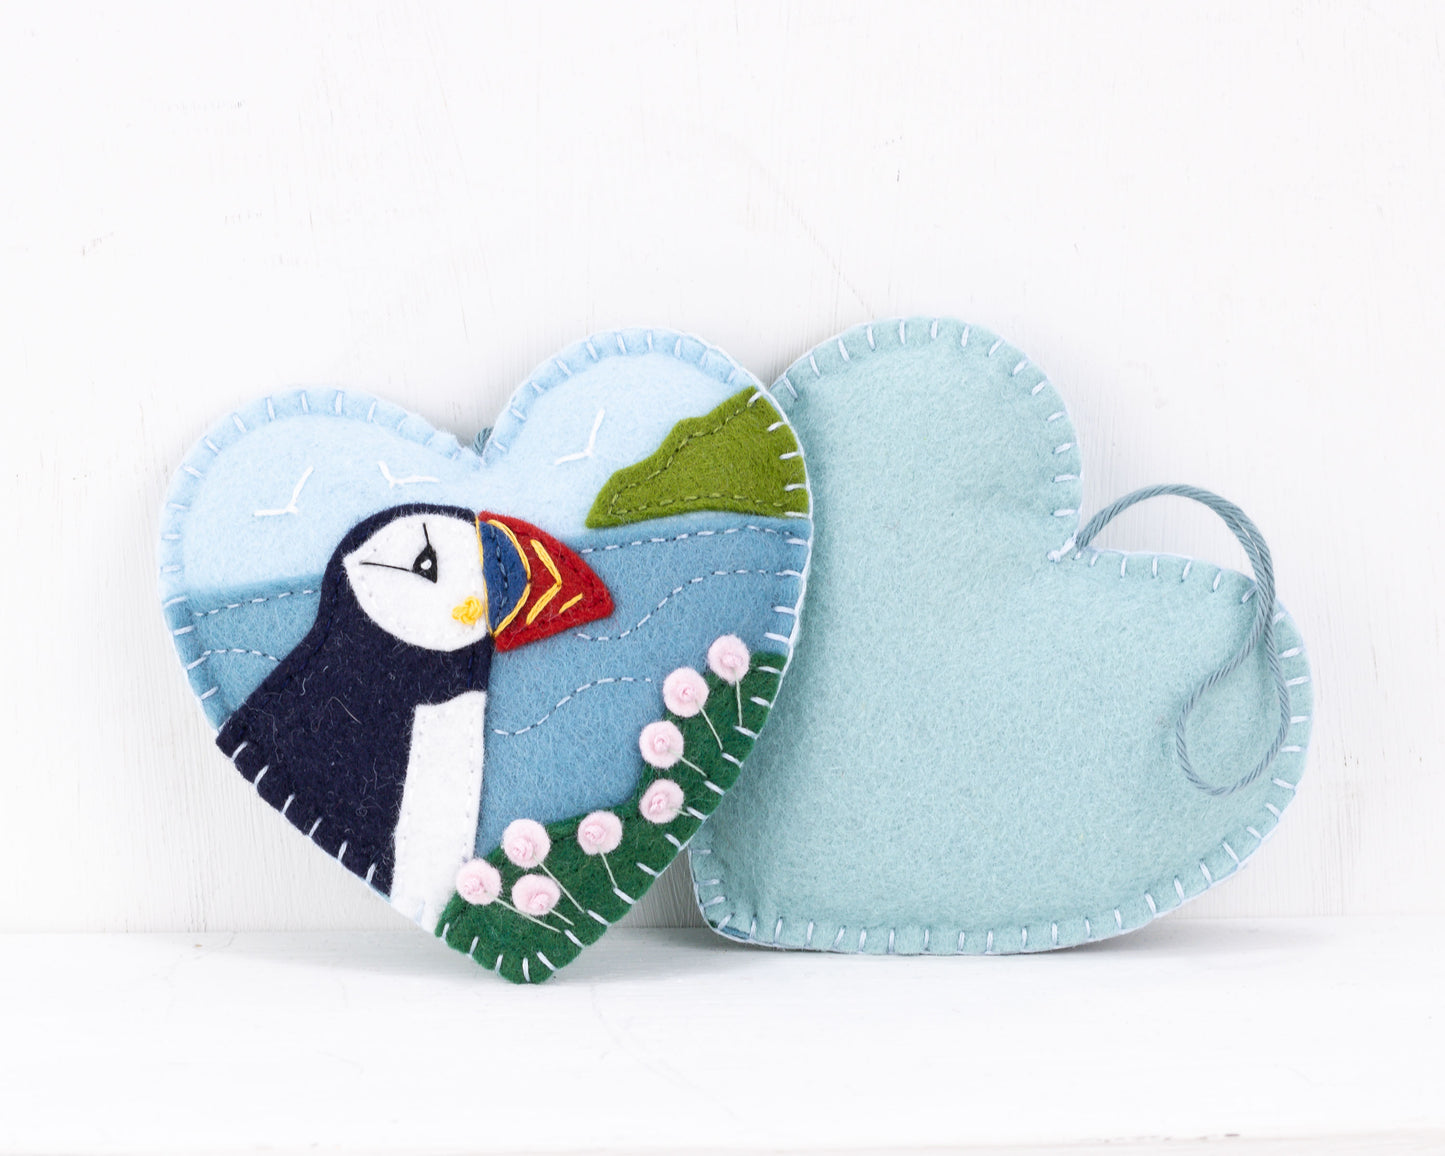 Puffin and Sea Pinks Felt Heart Ornament